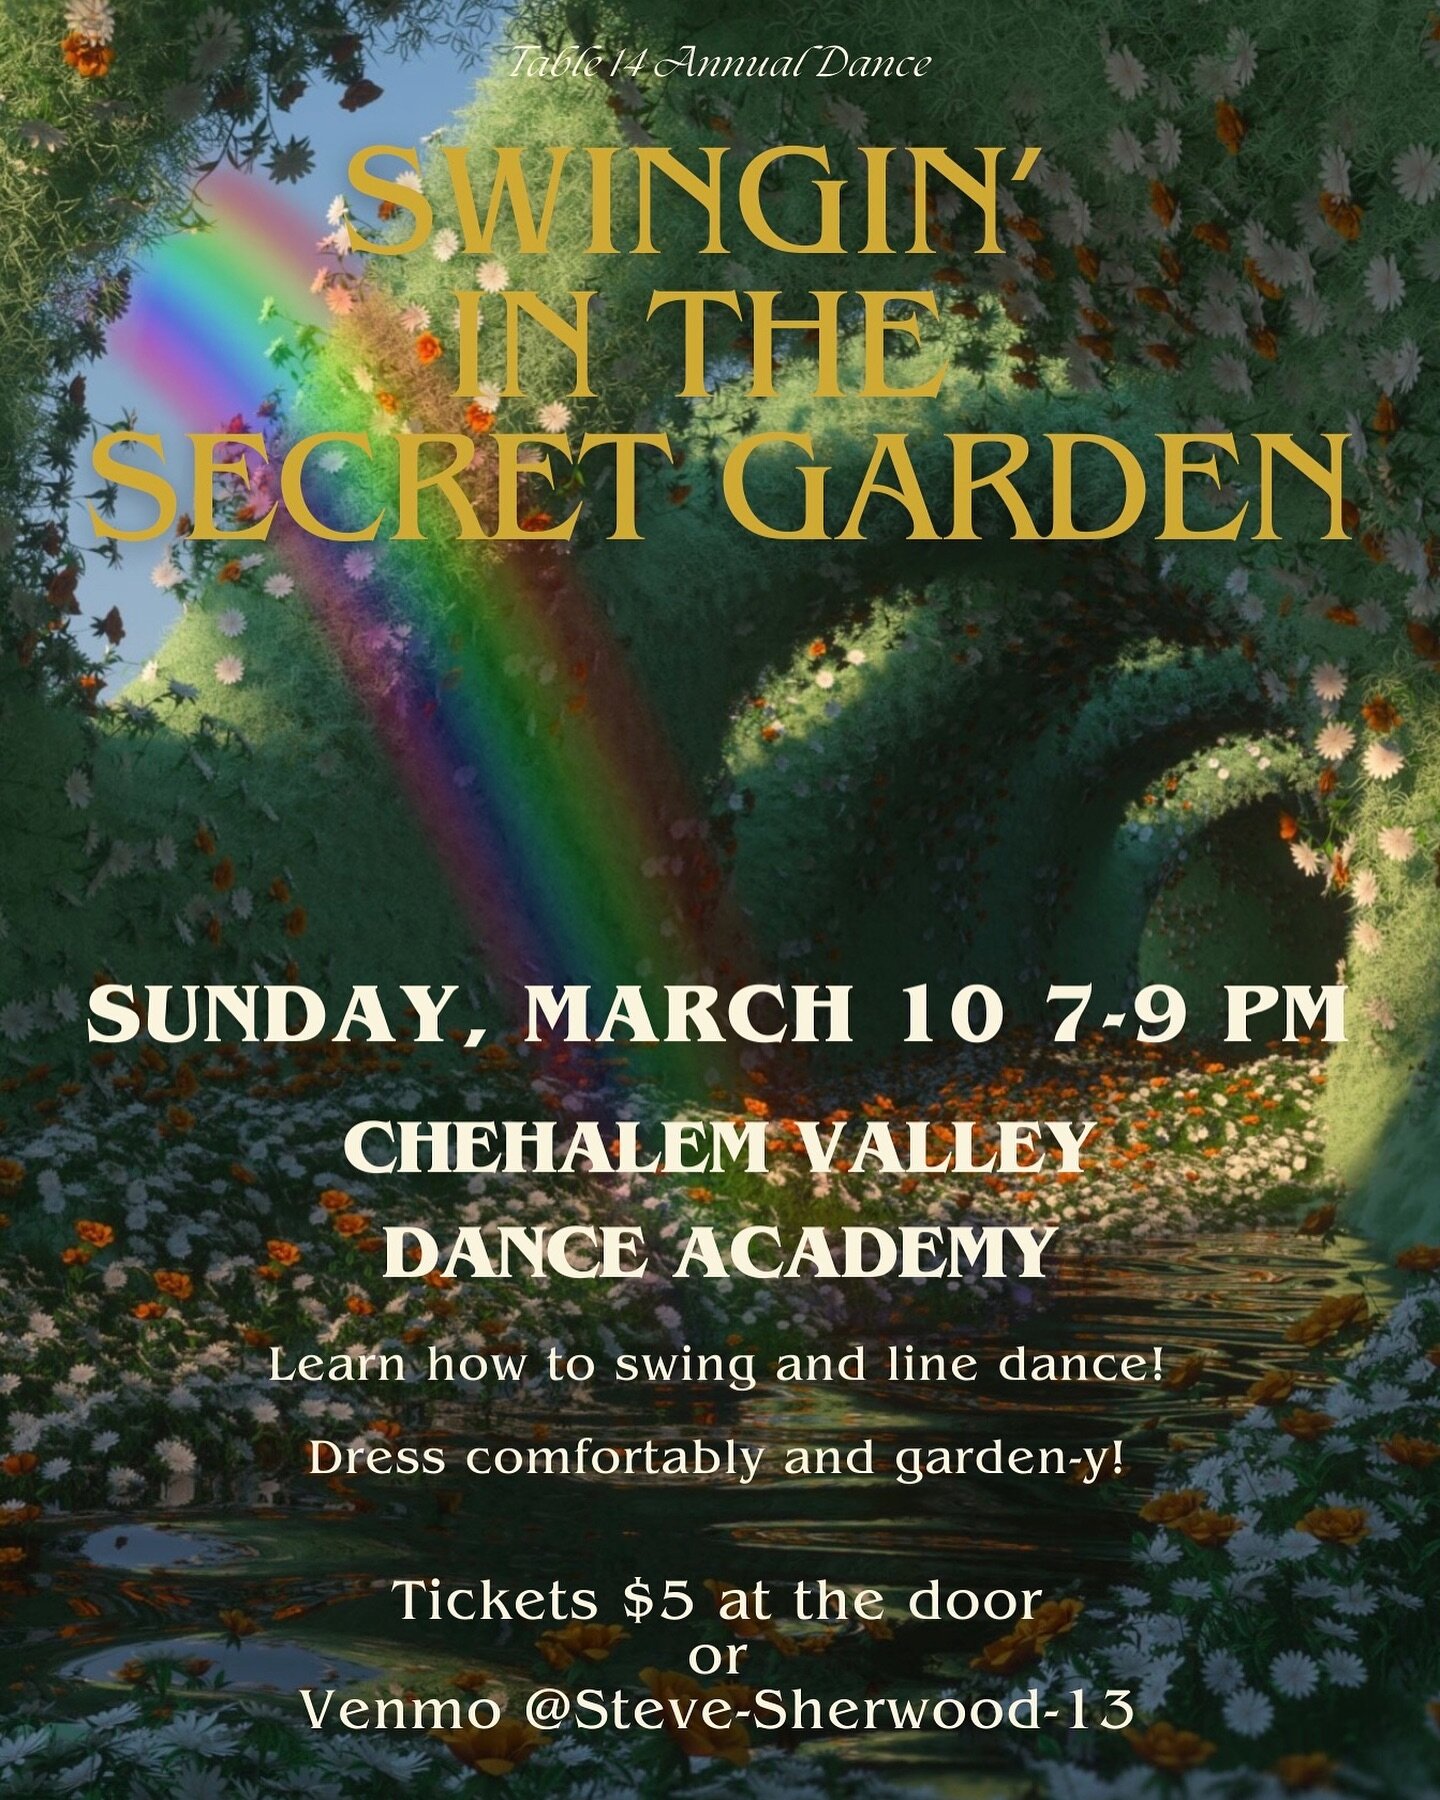 hiiiii! It&rsquo;s the one you&rsquo;ve been waiting for! Our annual dance is SWINGIN IN THE SECRET GARDEN! We&rsquo;ll be teaching people how to swing and line dance👯 Tickets are $5 (please DM us if you&rsquo;re unable to pay, we can comp your tick